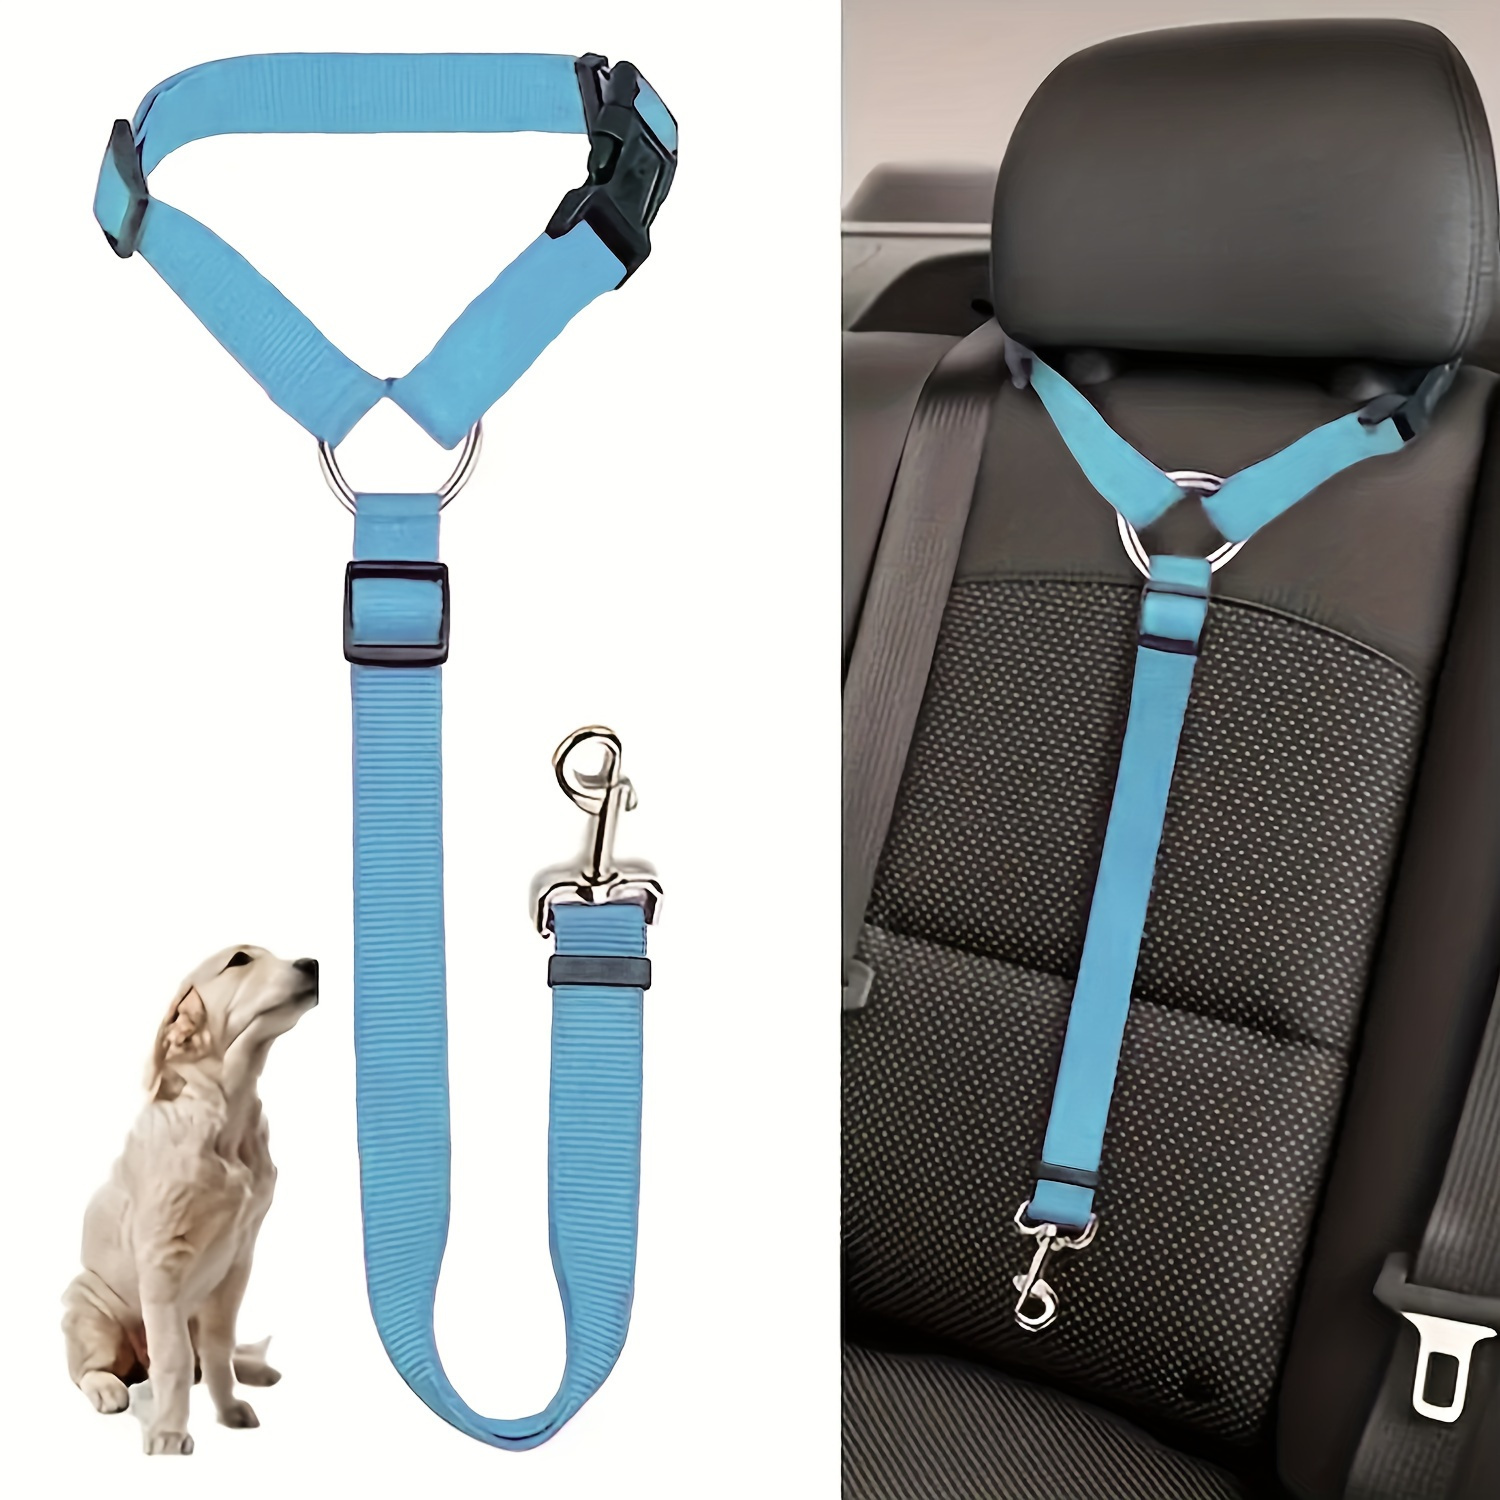 

Pet Car Seat Belts, Dog And Cat Car Leash, Rear Seat Retractable Cat And Dog Leash, Make Your Dog Safer!